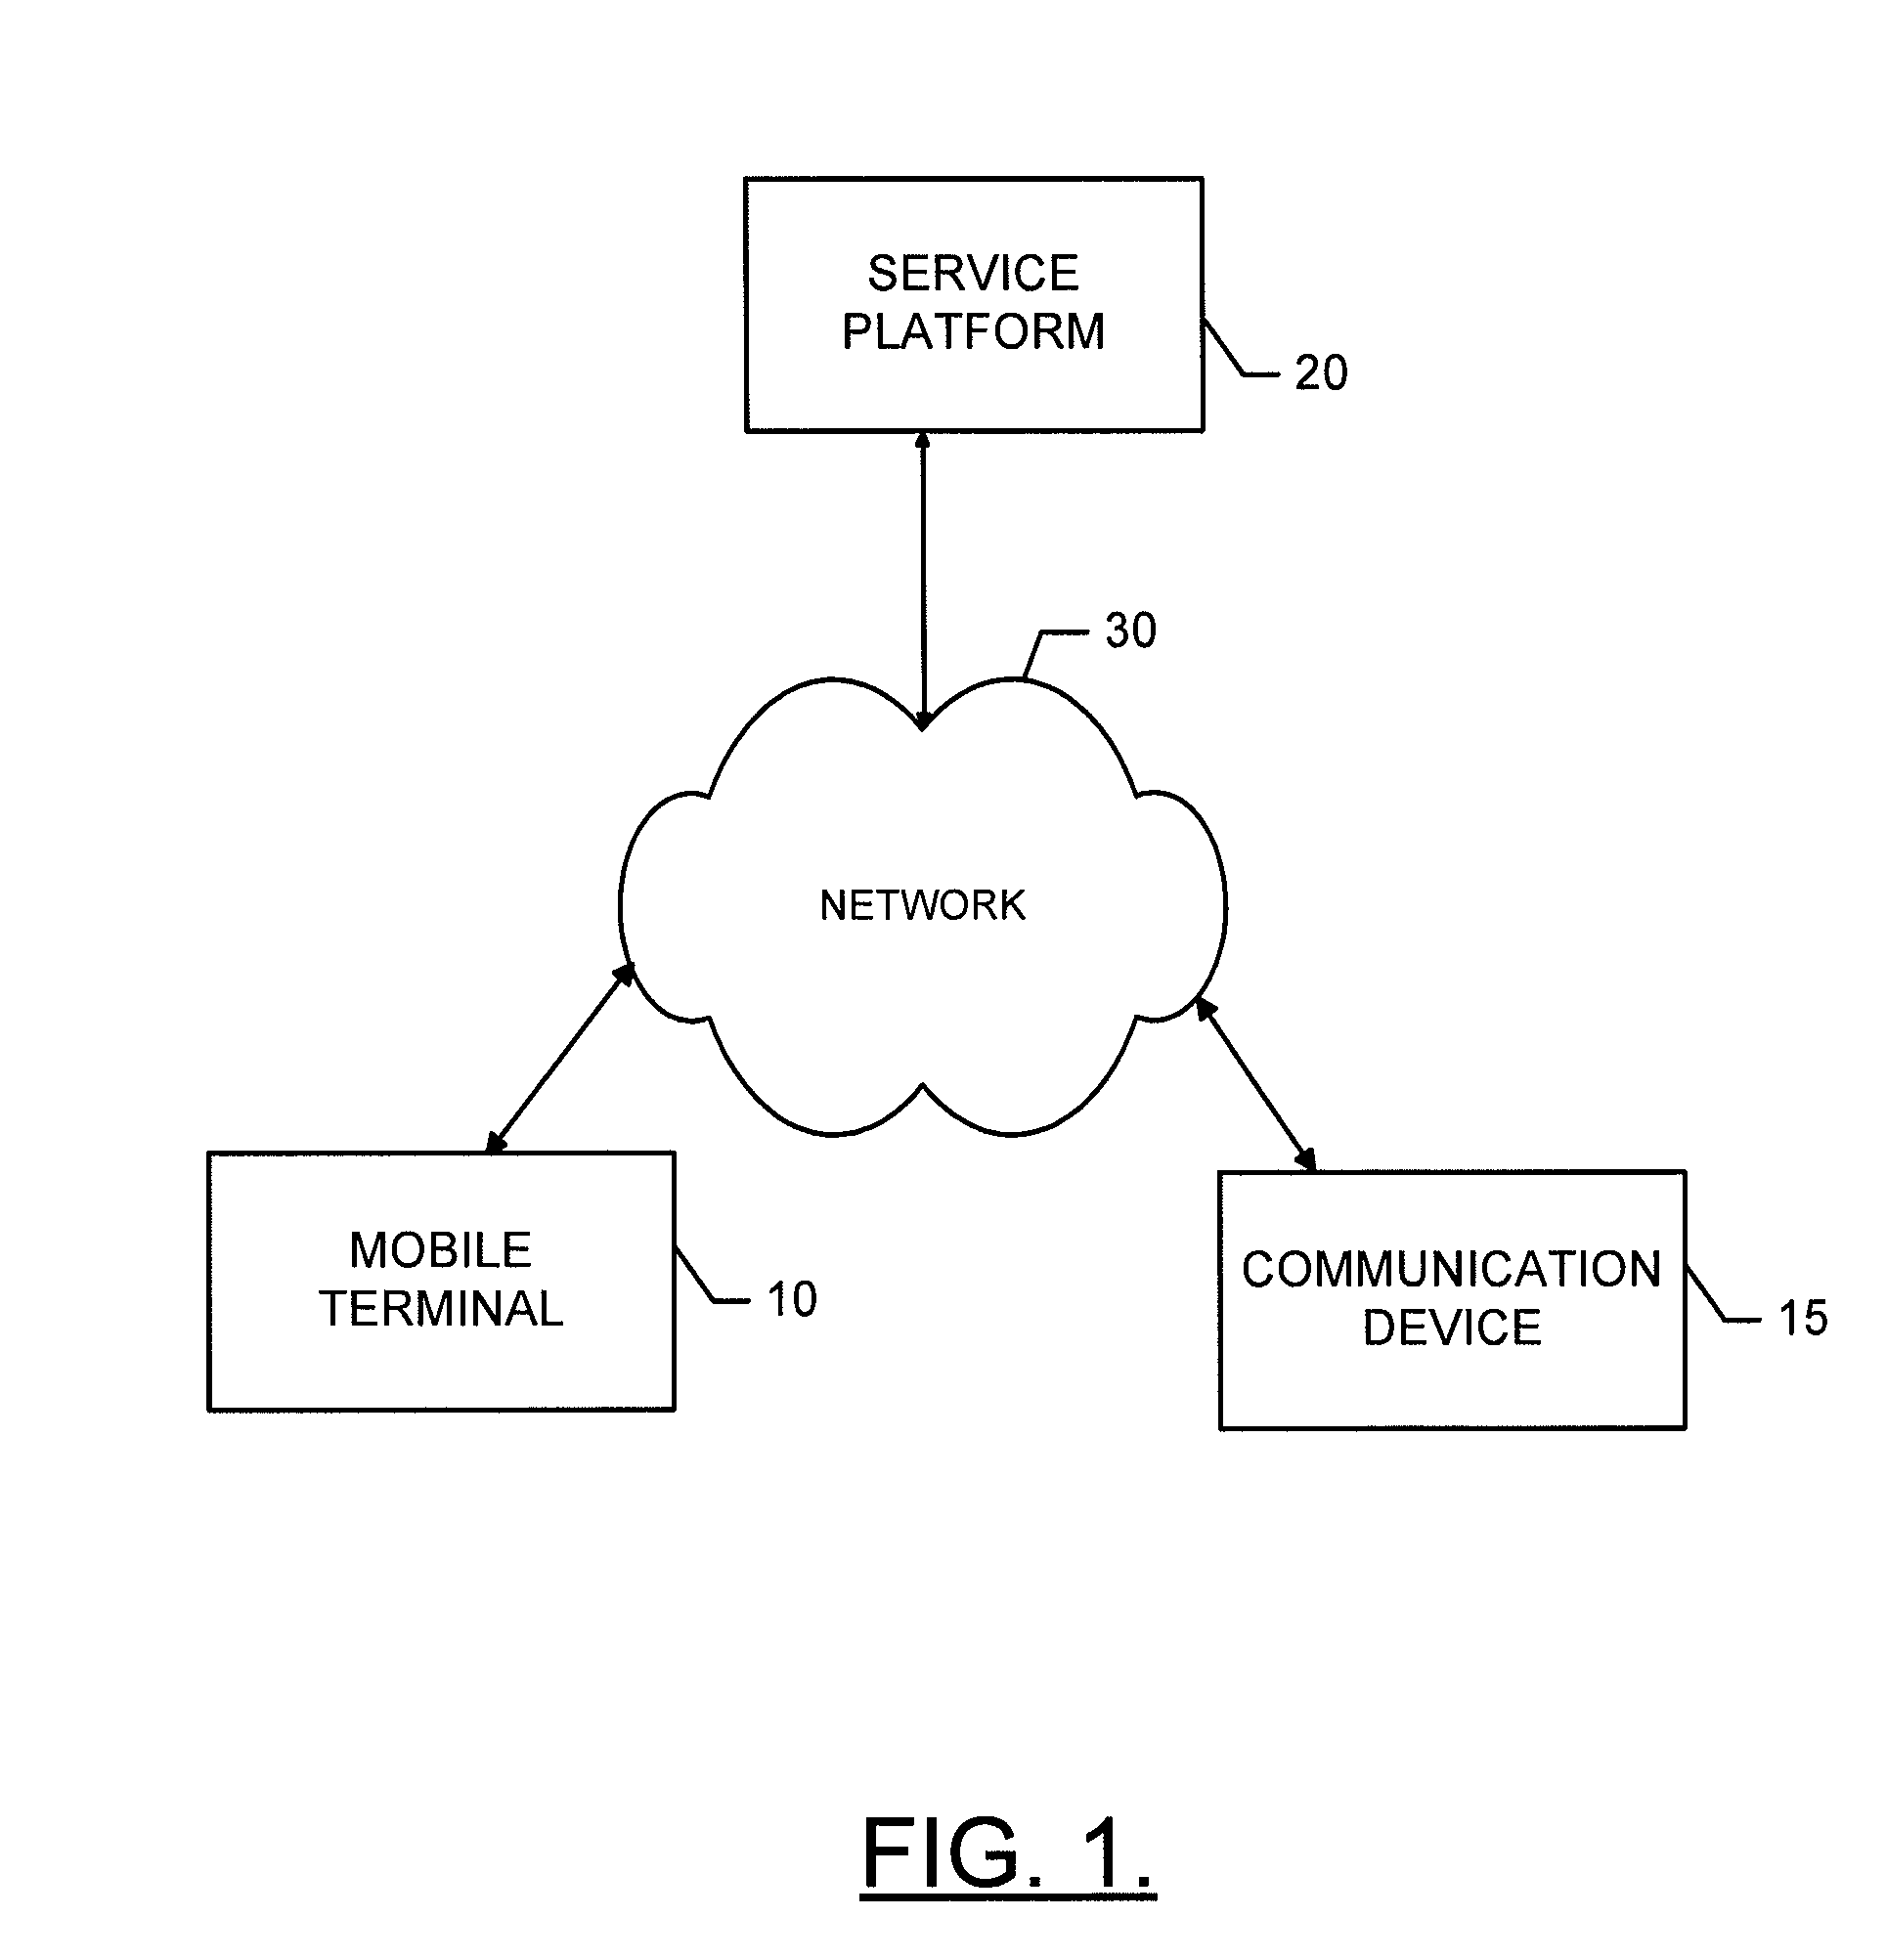 Method, apparatus and computer program product for providing an adaptive authentication session validity time